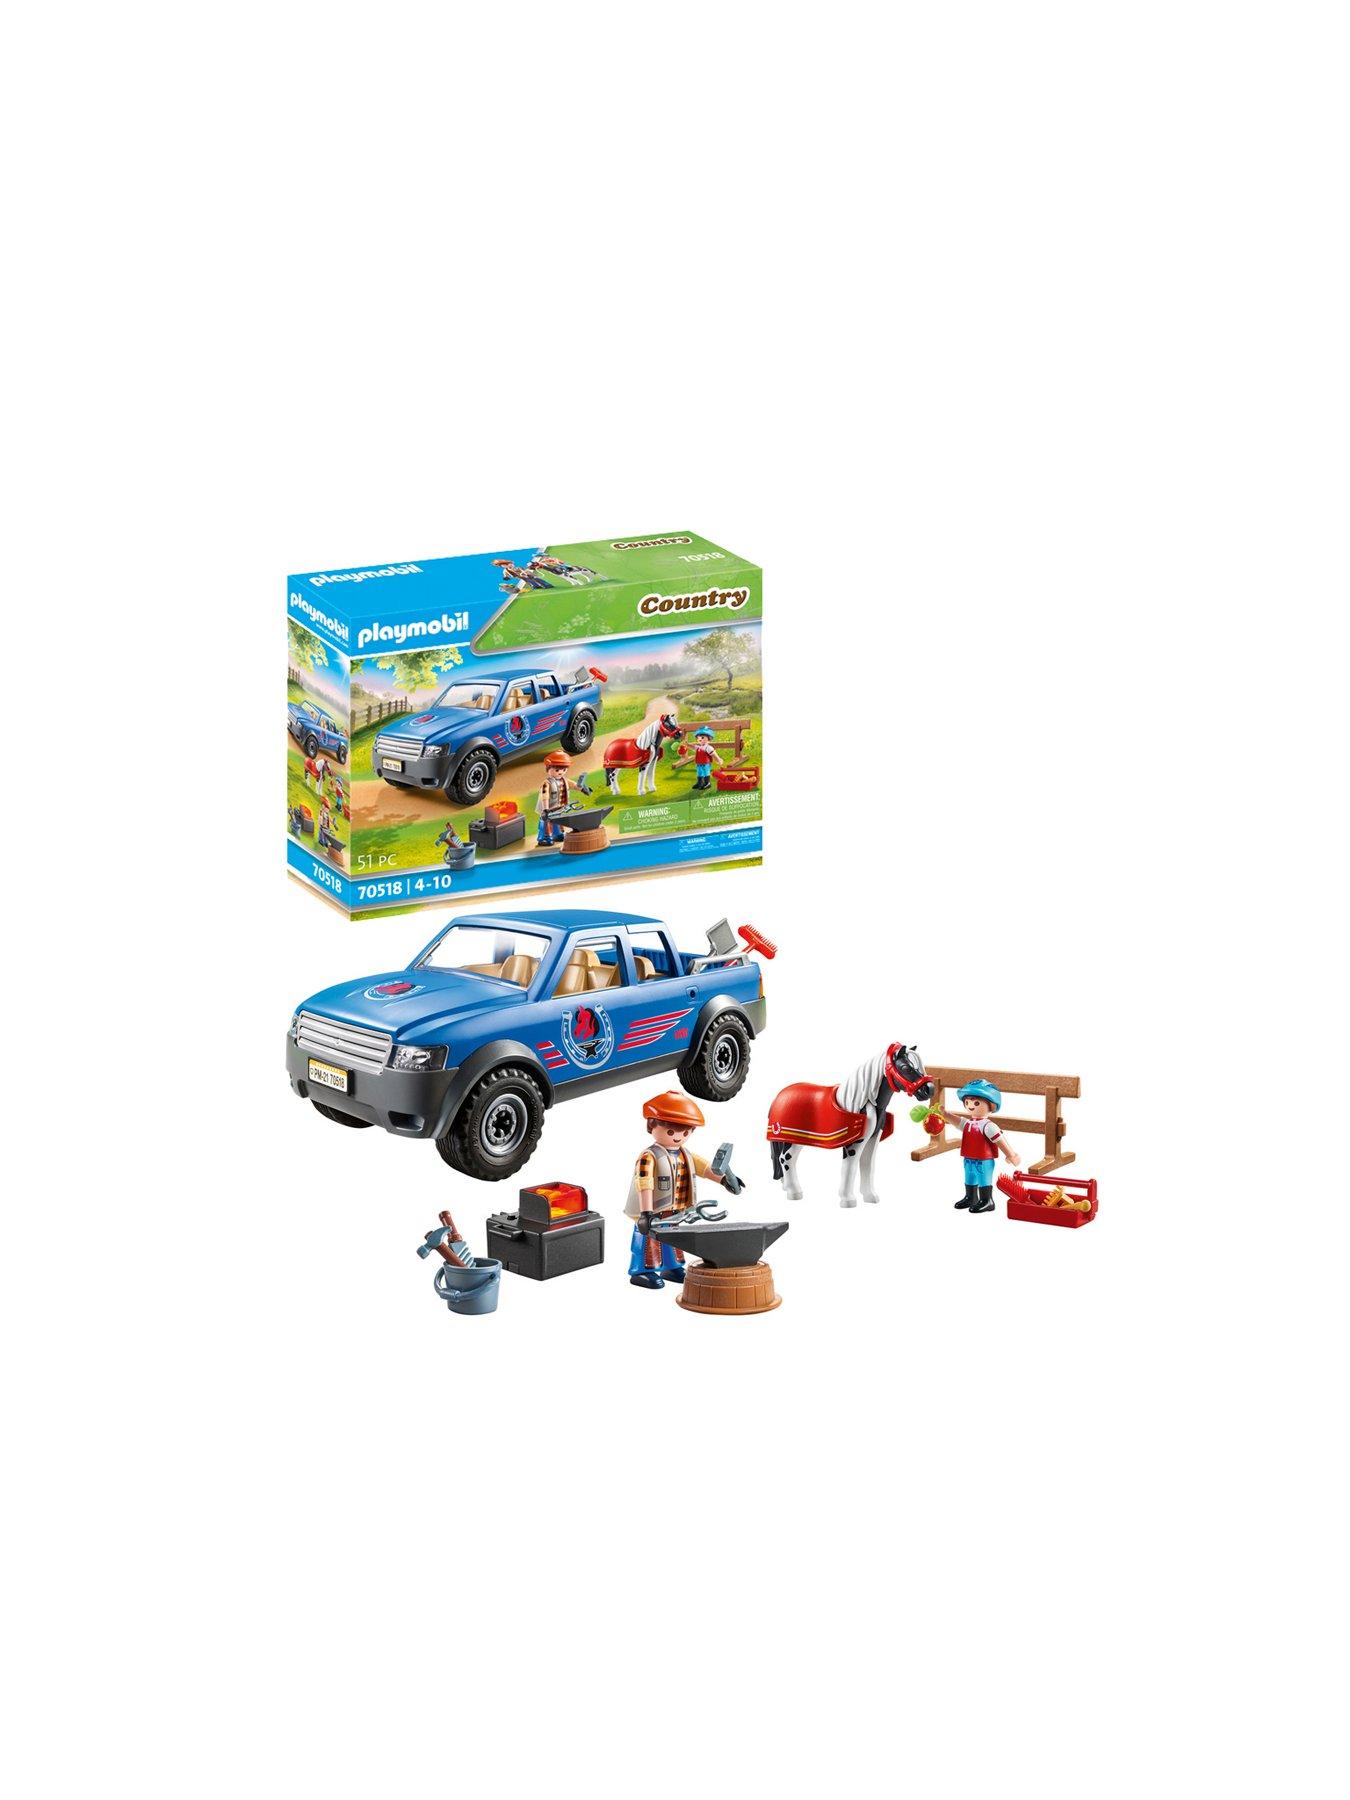 Playmobil Country Farm Shop - A2Z Science & Learning Toy Store